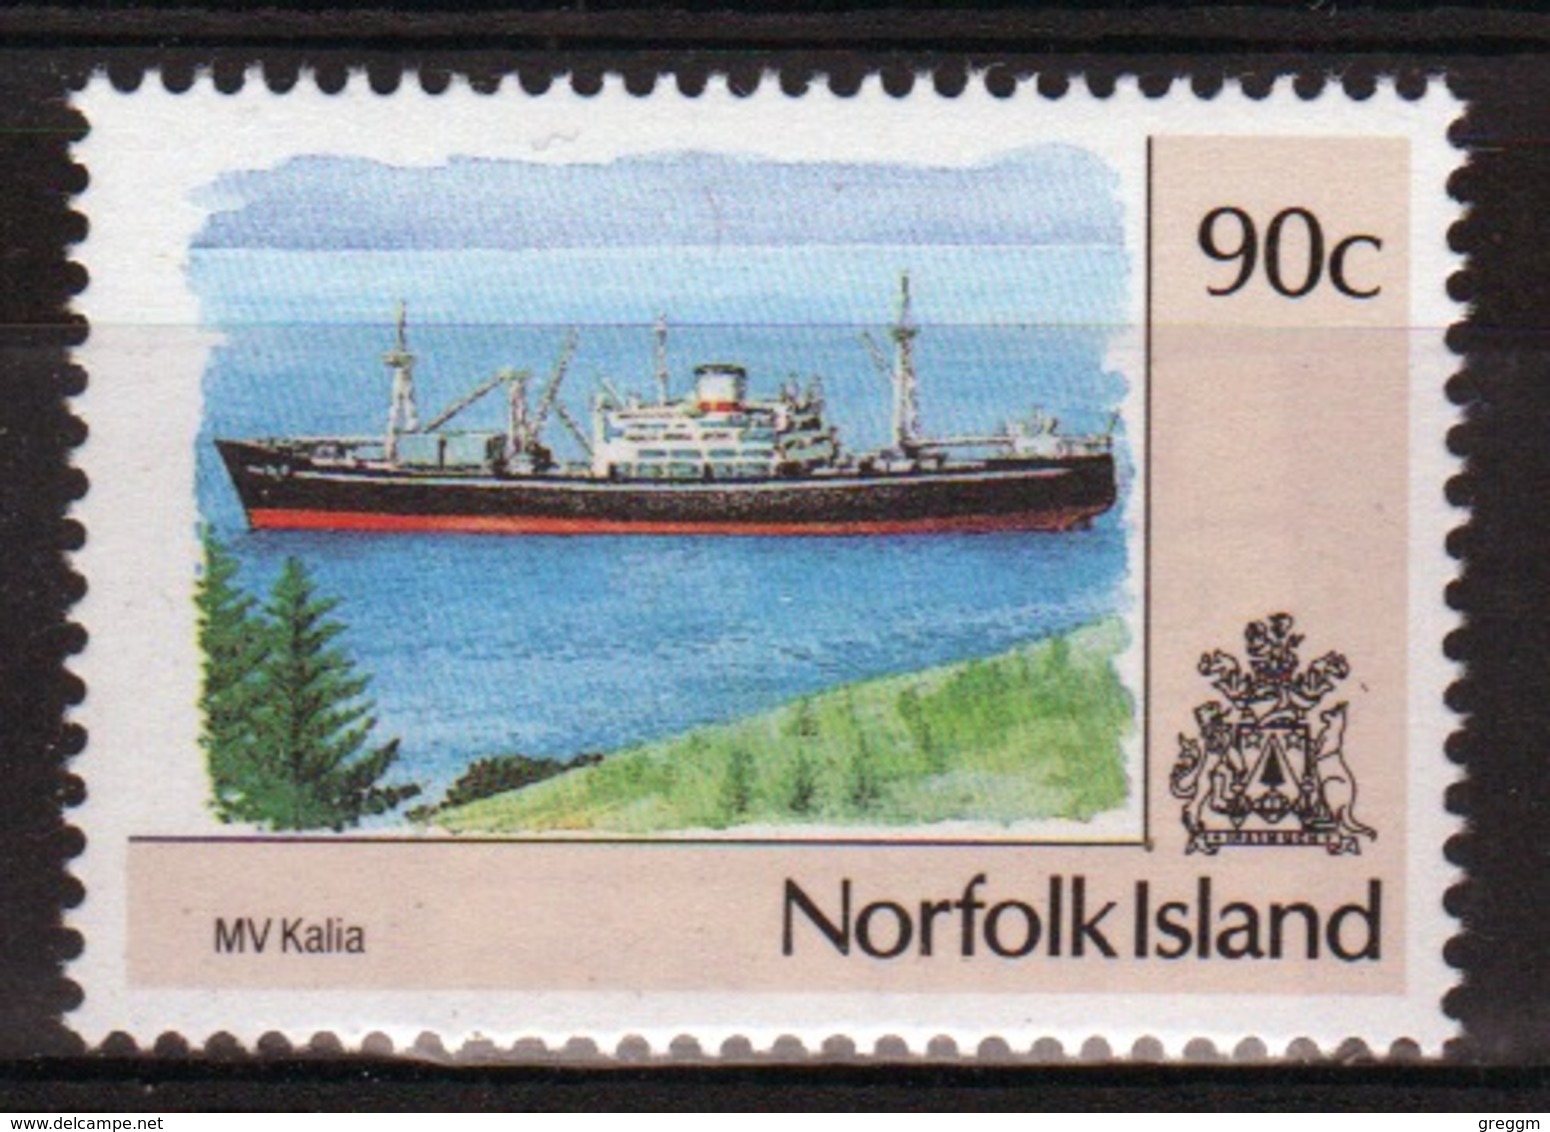 Norfolk Island Single 90c Definitive Stamp From The 1990 Ship Series. - Norfolk Island